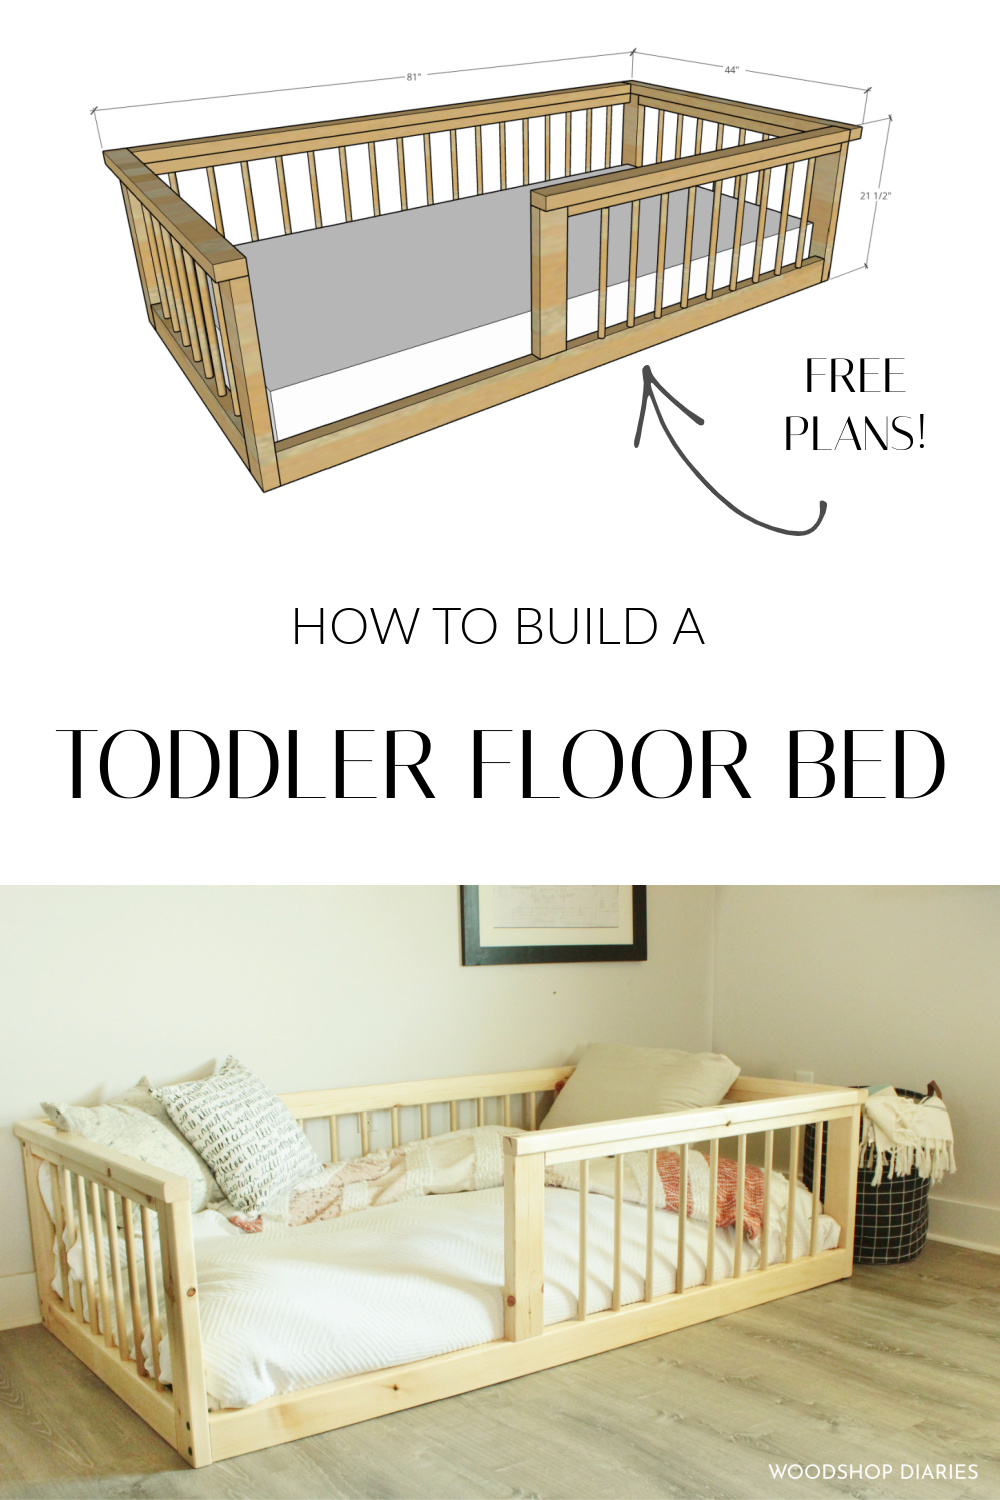 Pinterest collage image showing overall bed dimensional diagram at top and completed bed at bottom with text "How to build a toddler floor bed" in middle